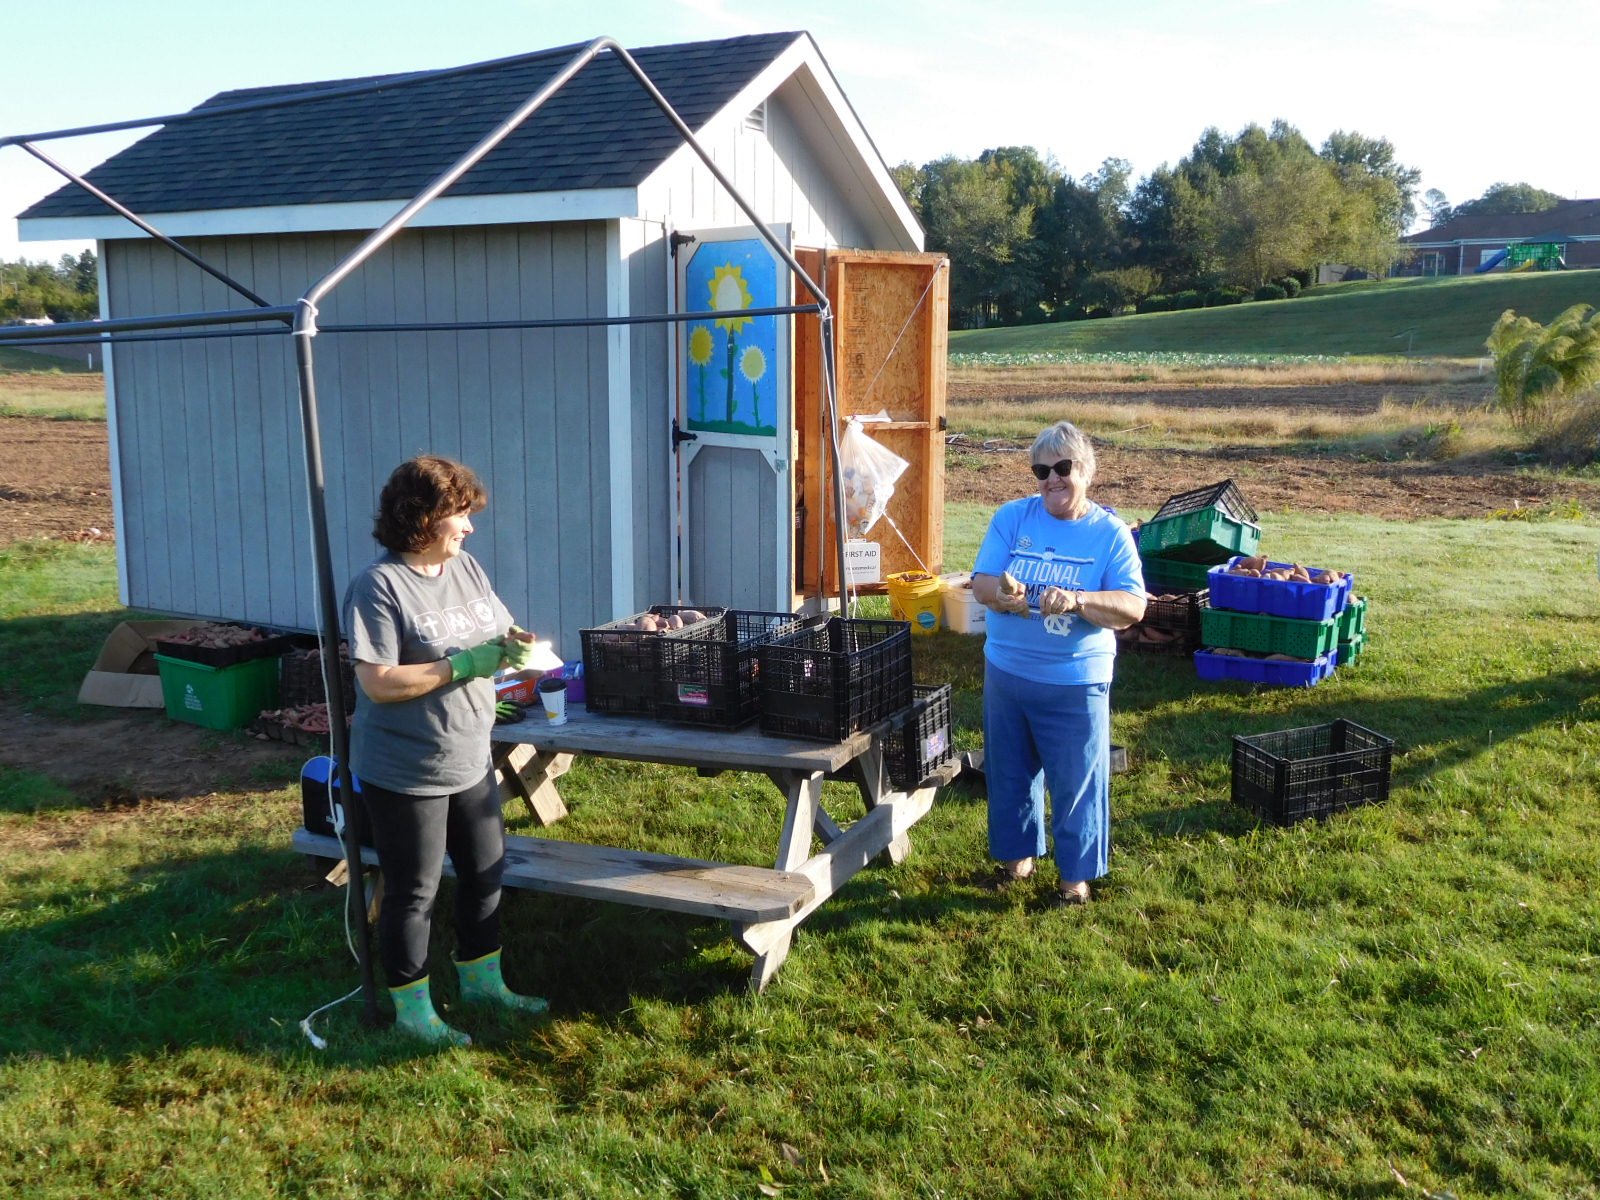 Fall Share the Harvest Farm Workday: Small But Successful